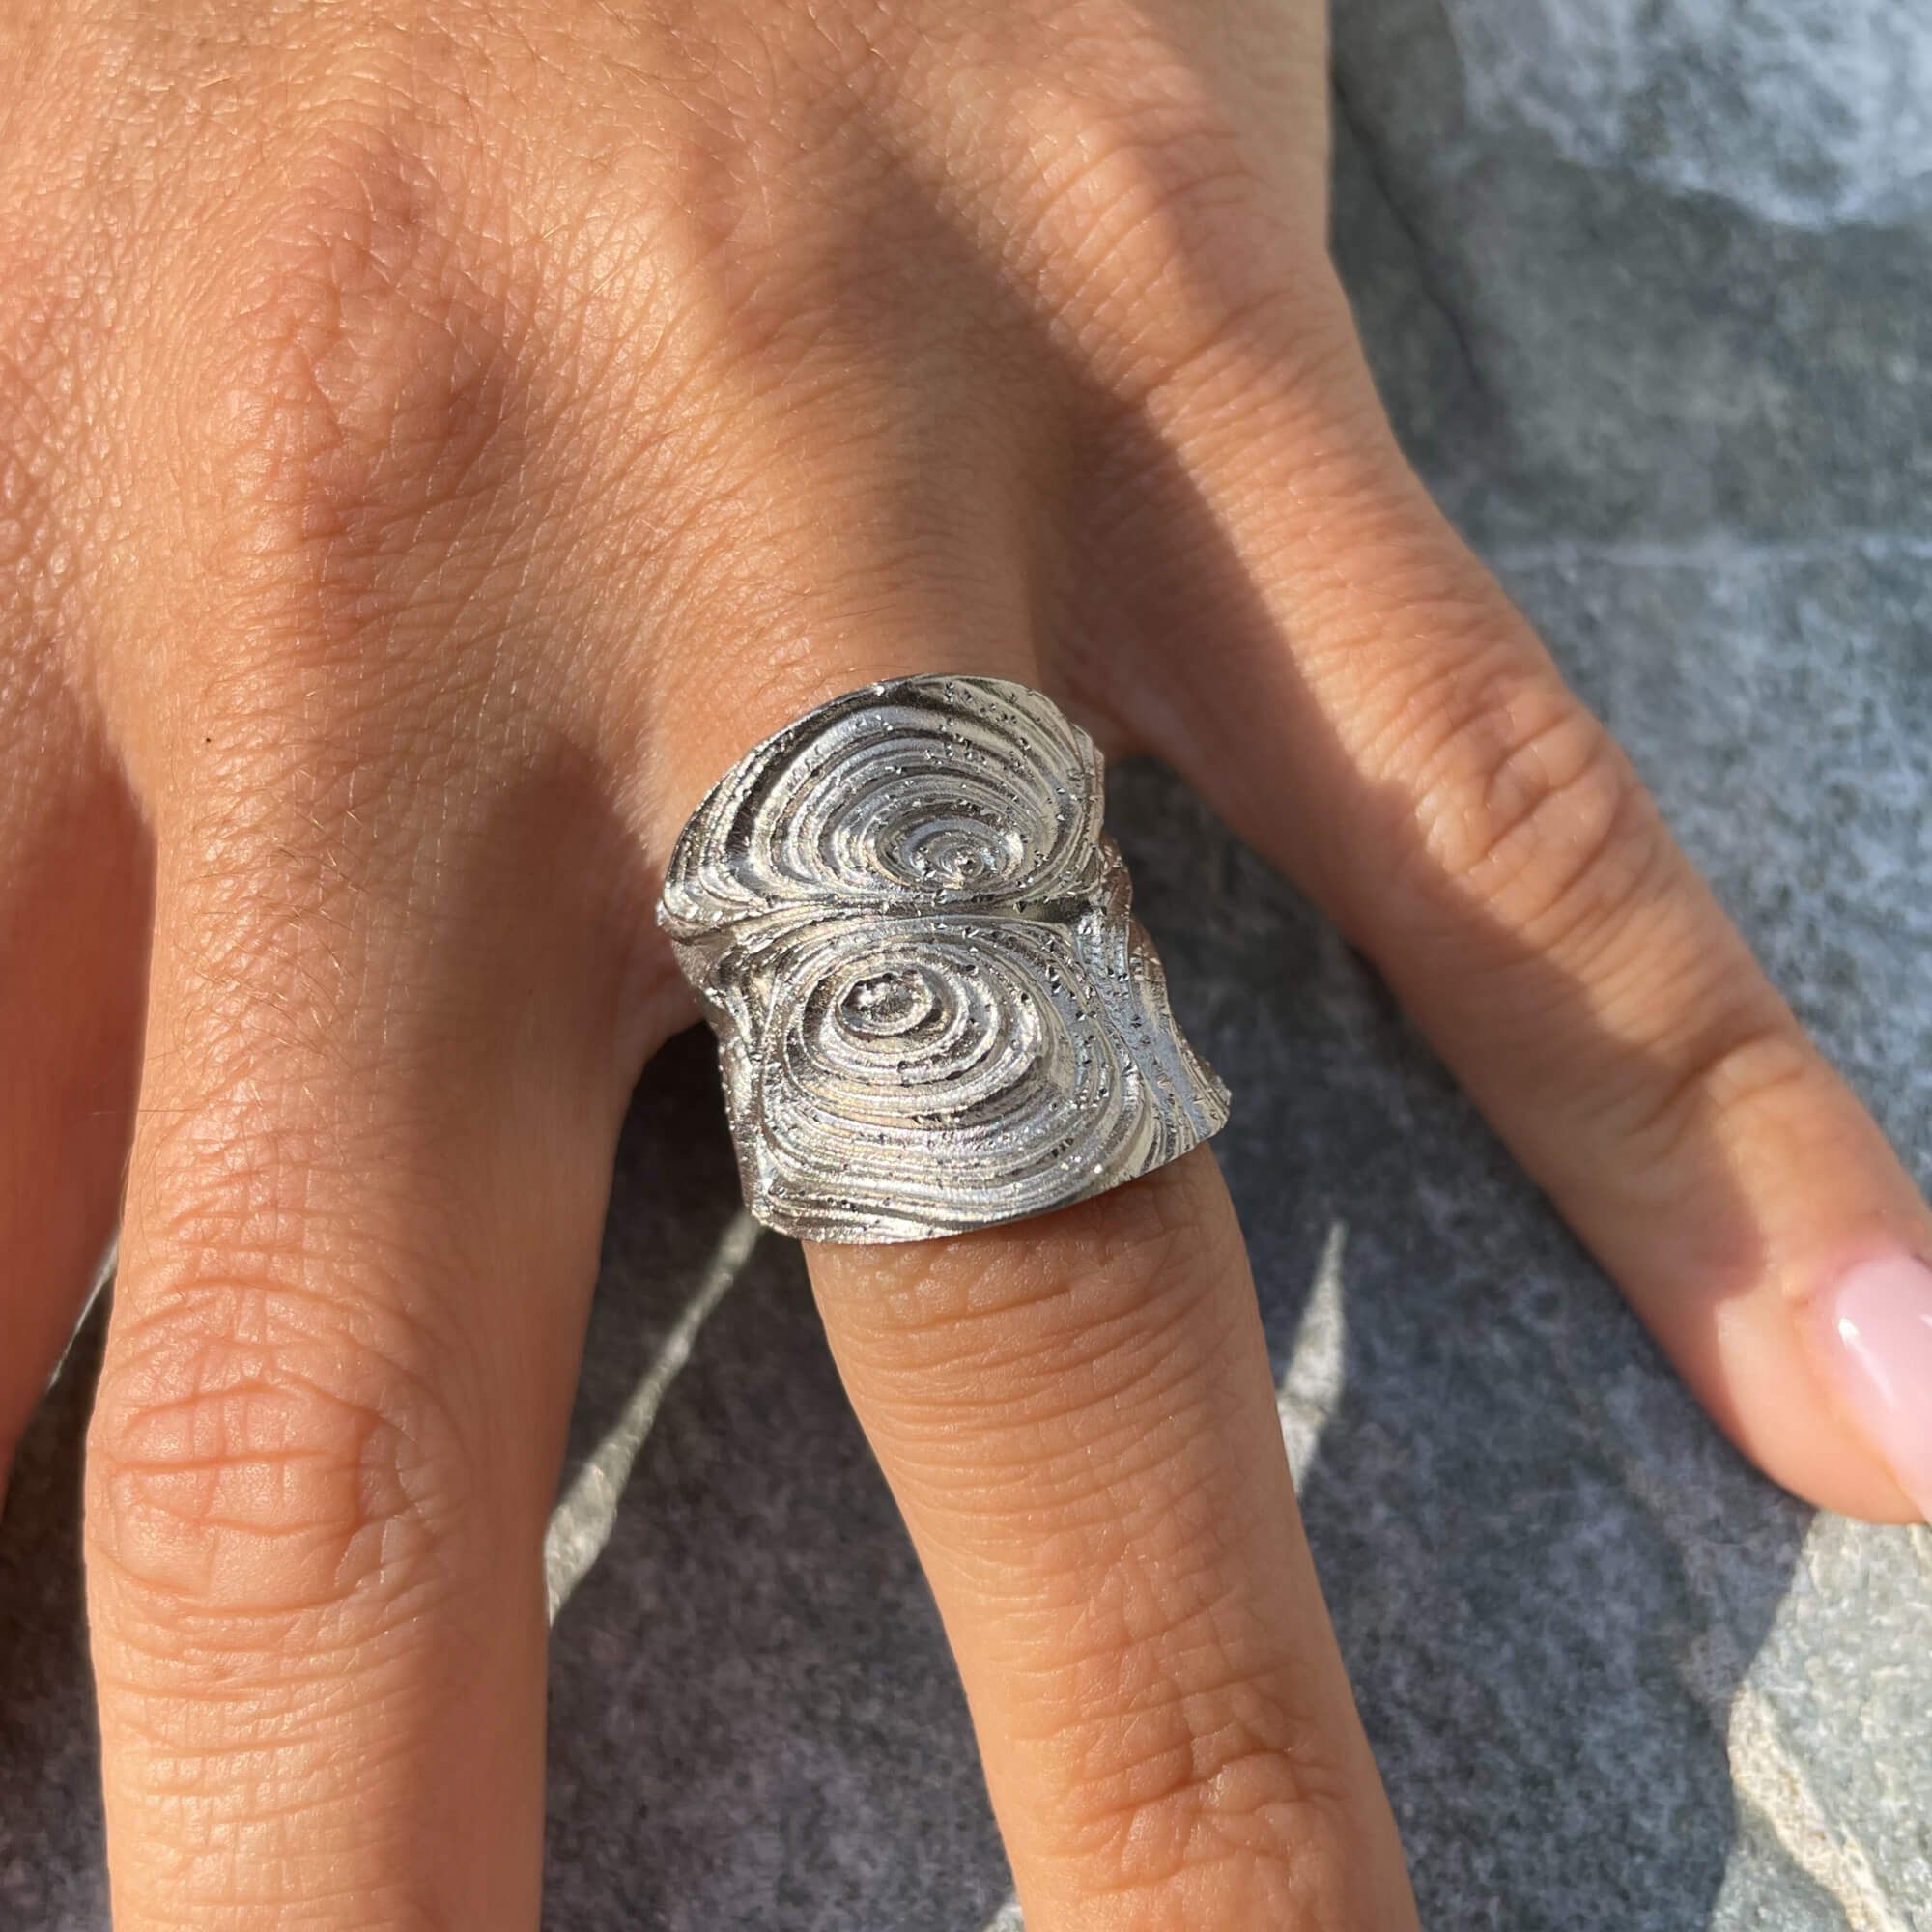 Worked sterling silver ring